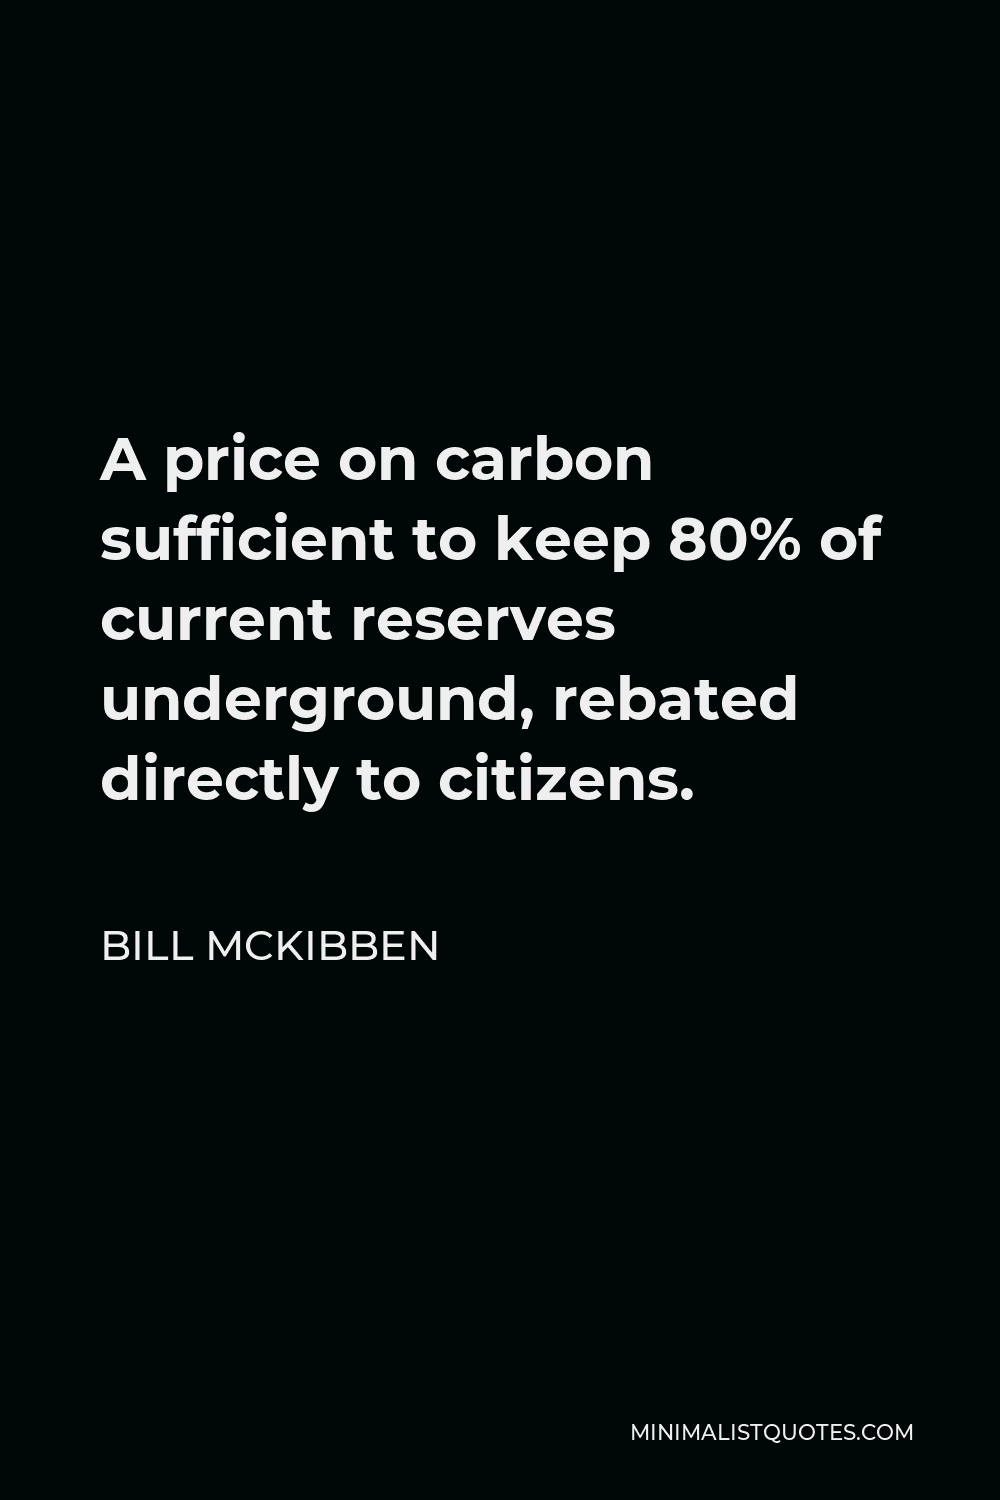 Bill McKibben Quote - A price on carbon sufficient to keep 80% of current reserves underground, rebated directly to citizens.